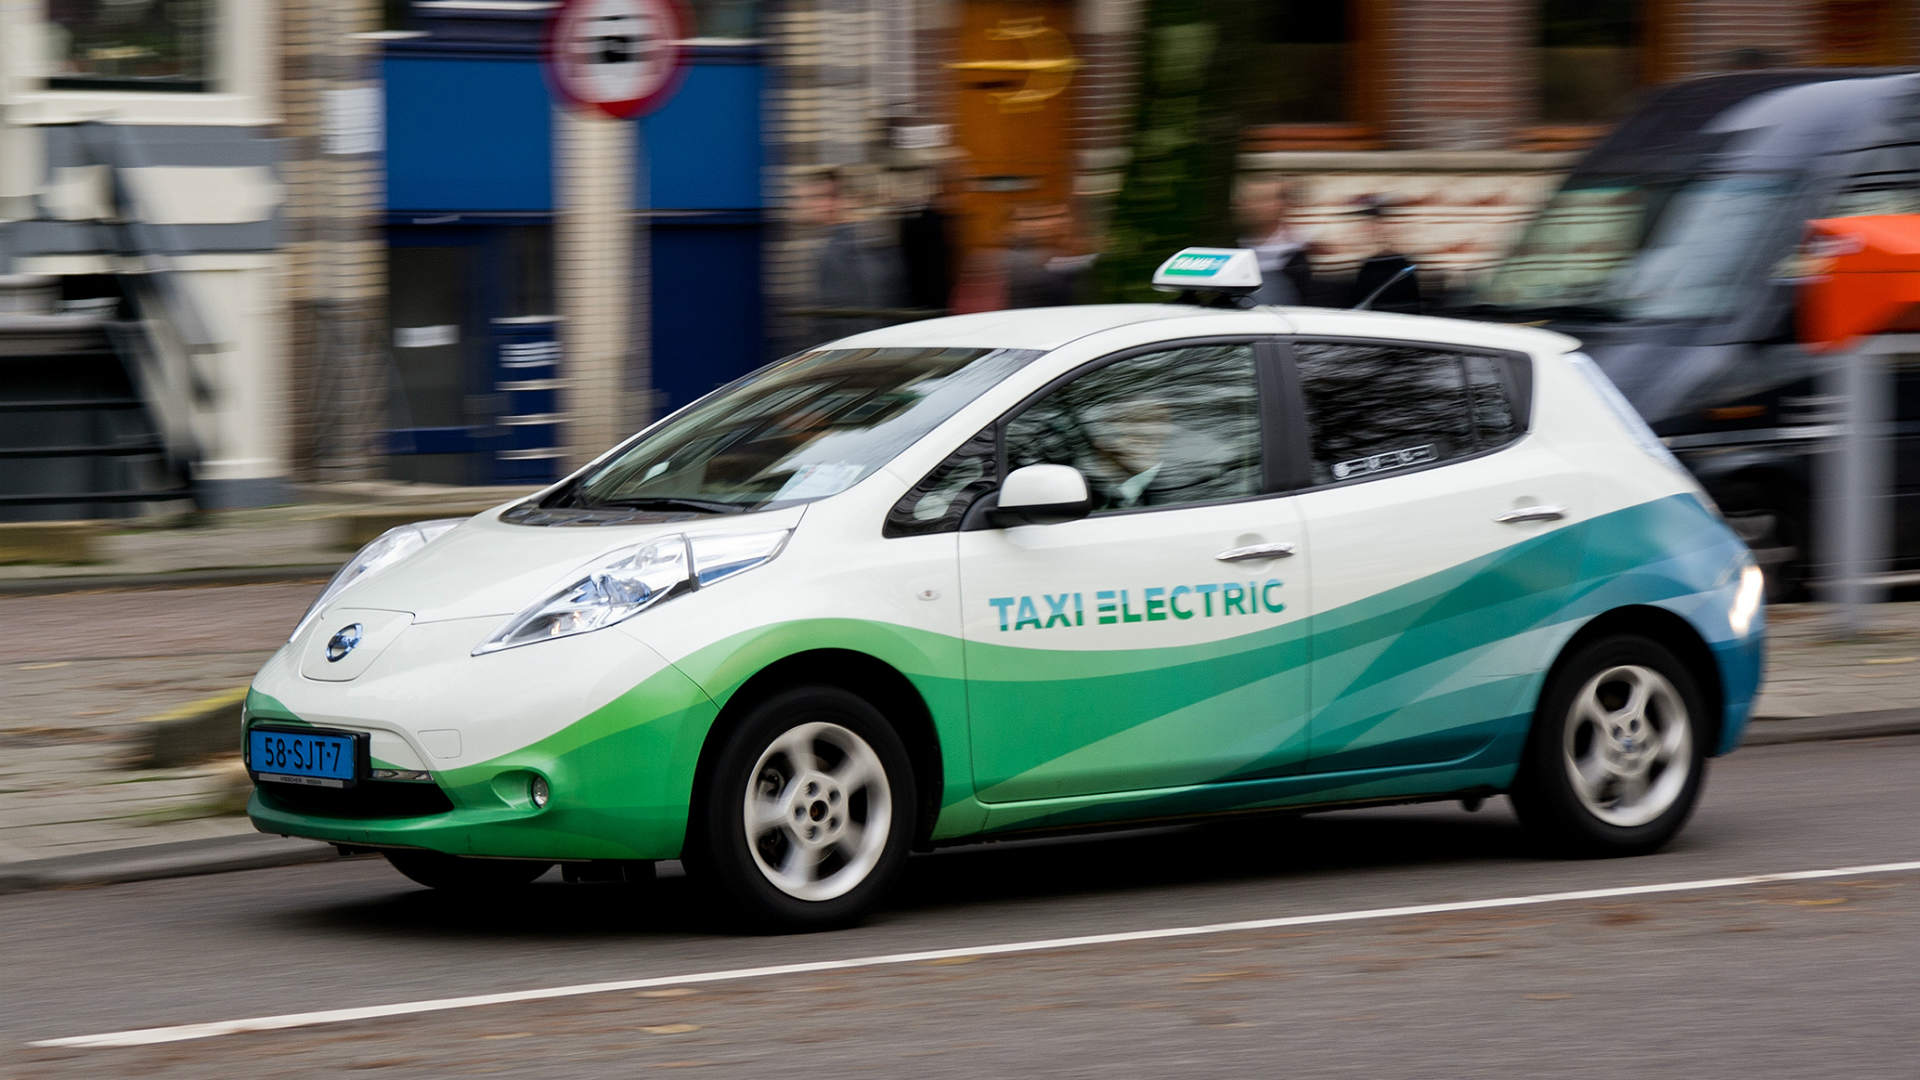 People willing to pay more for electric taxis